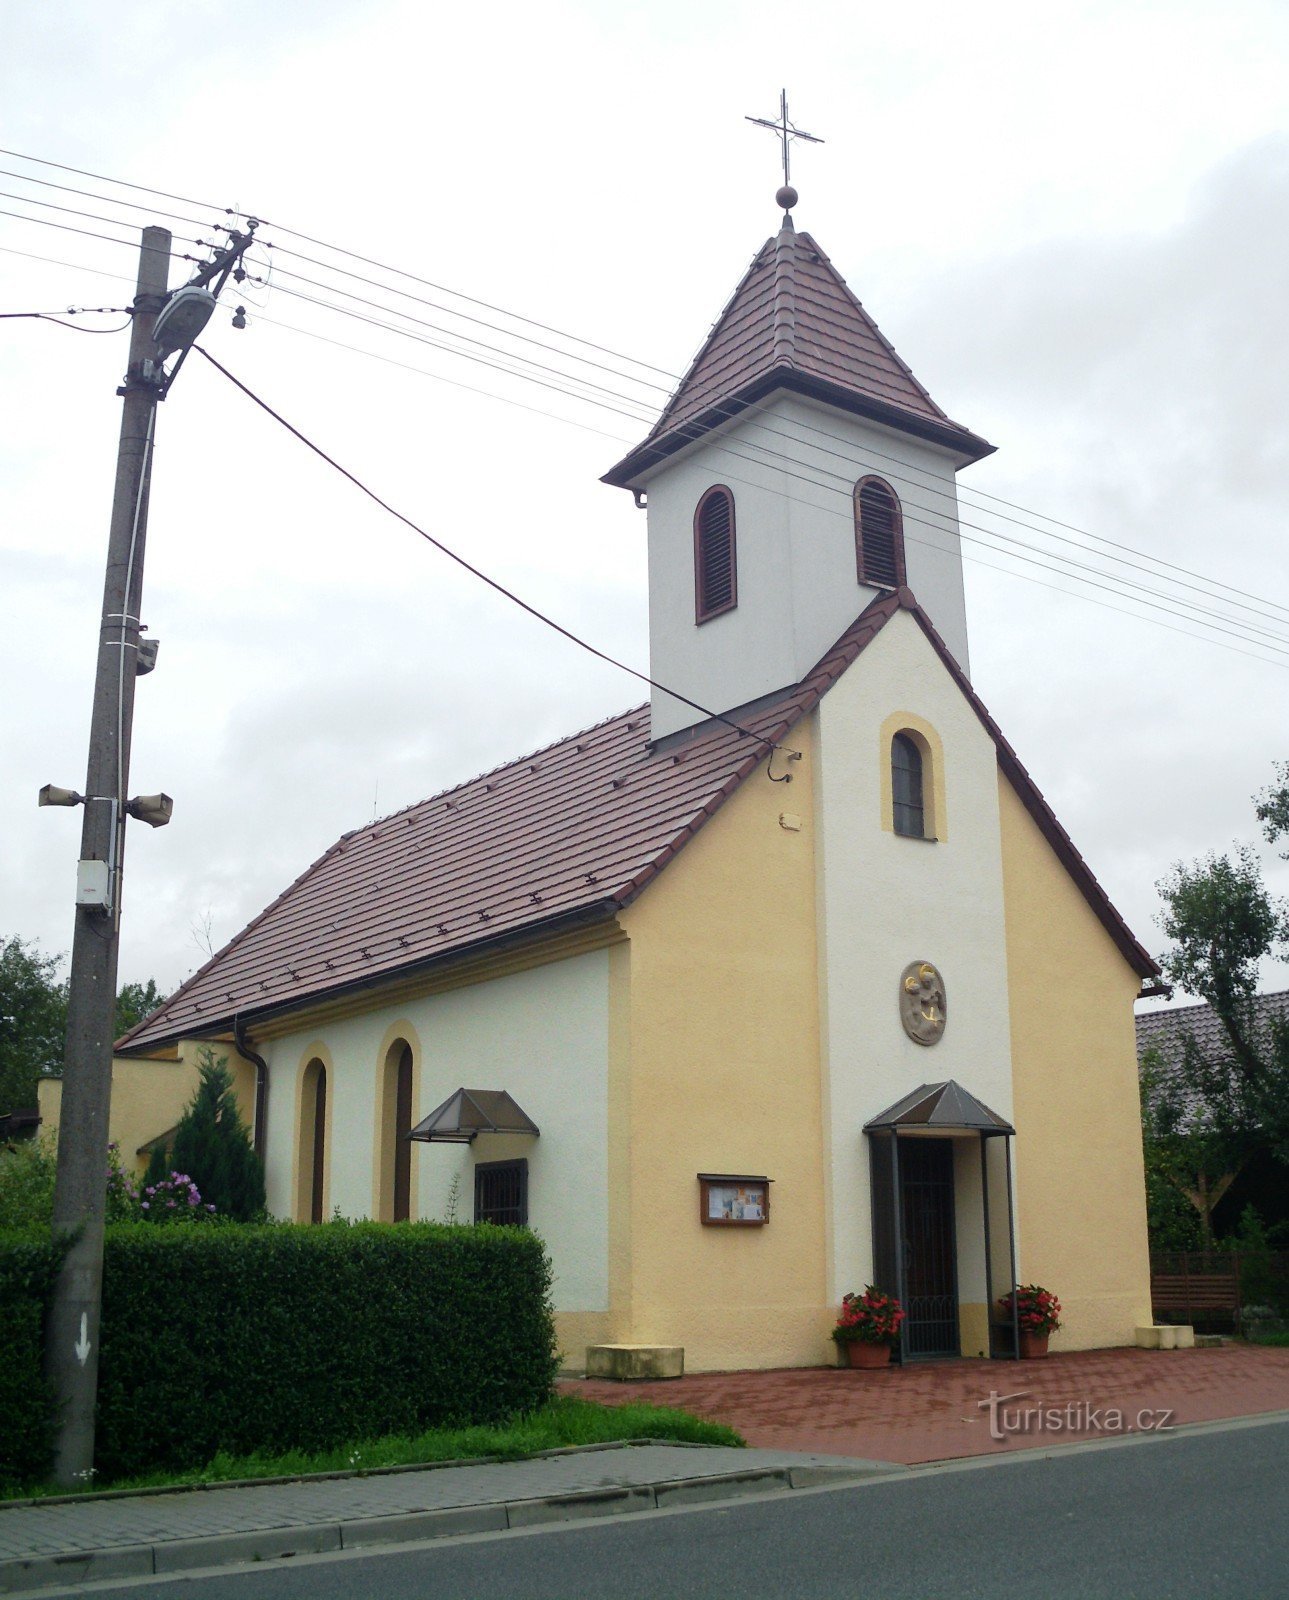 Church of Our Lady of the Rosary